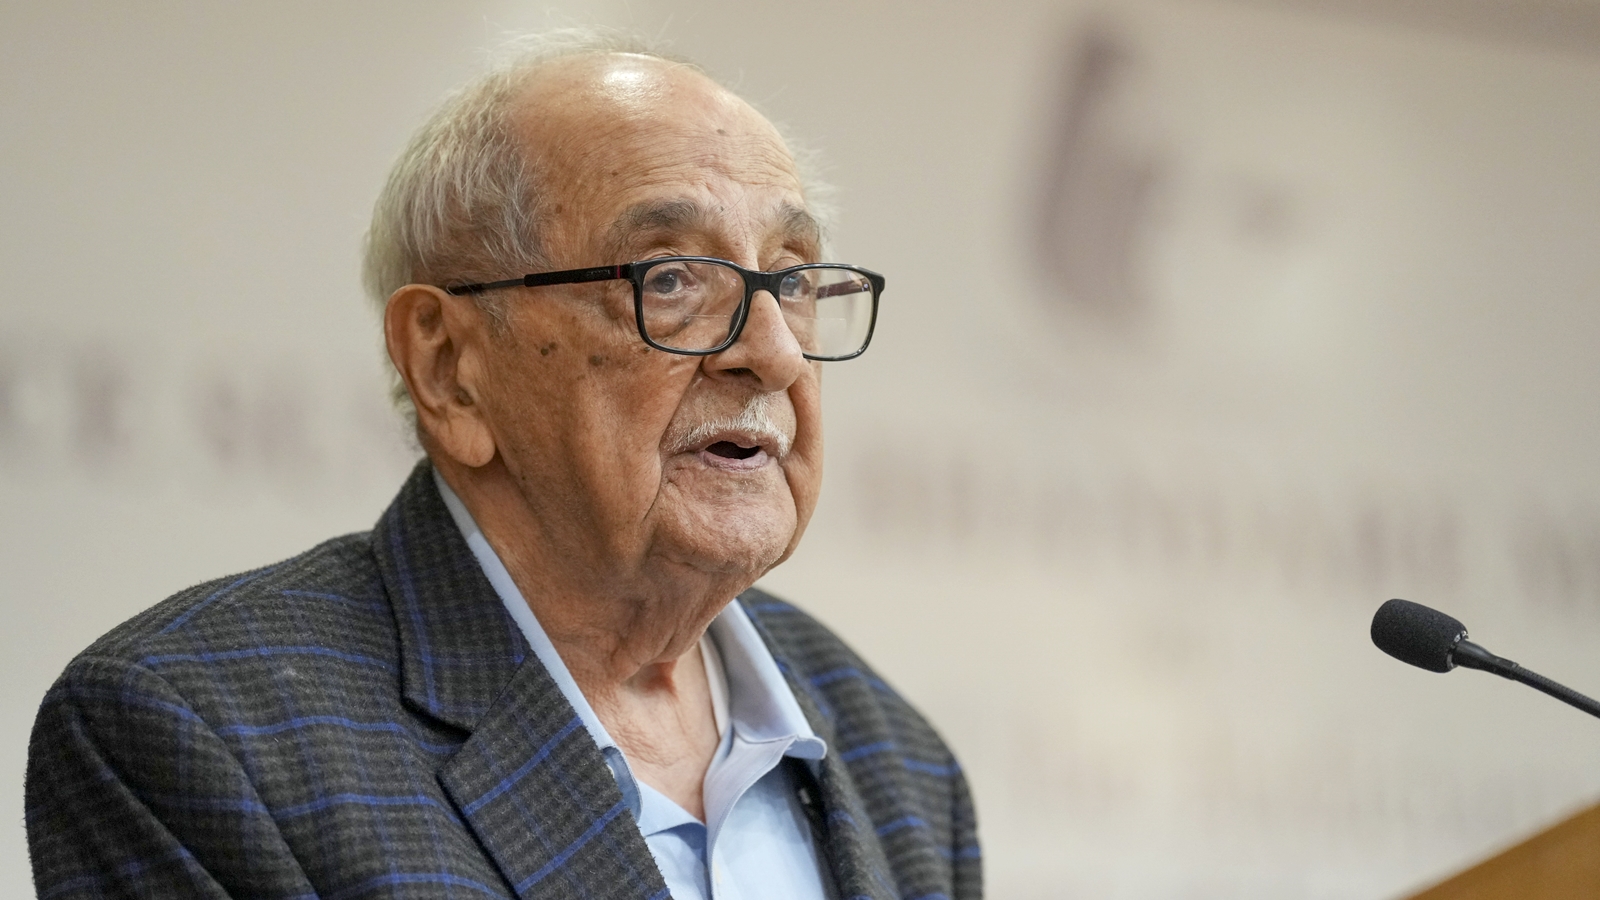 android, ‘great giant of an intellectual’: pm modi, cji chandrachud mourn fali s nariman’s passing